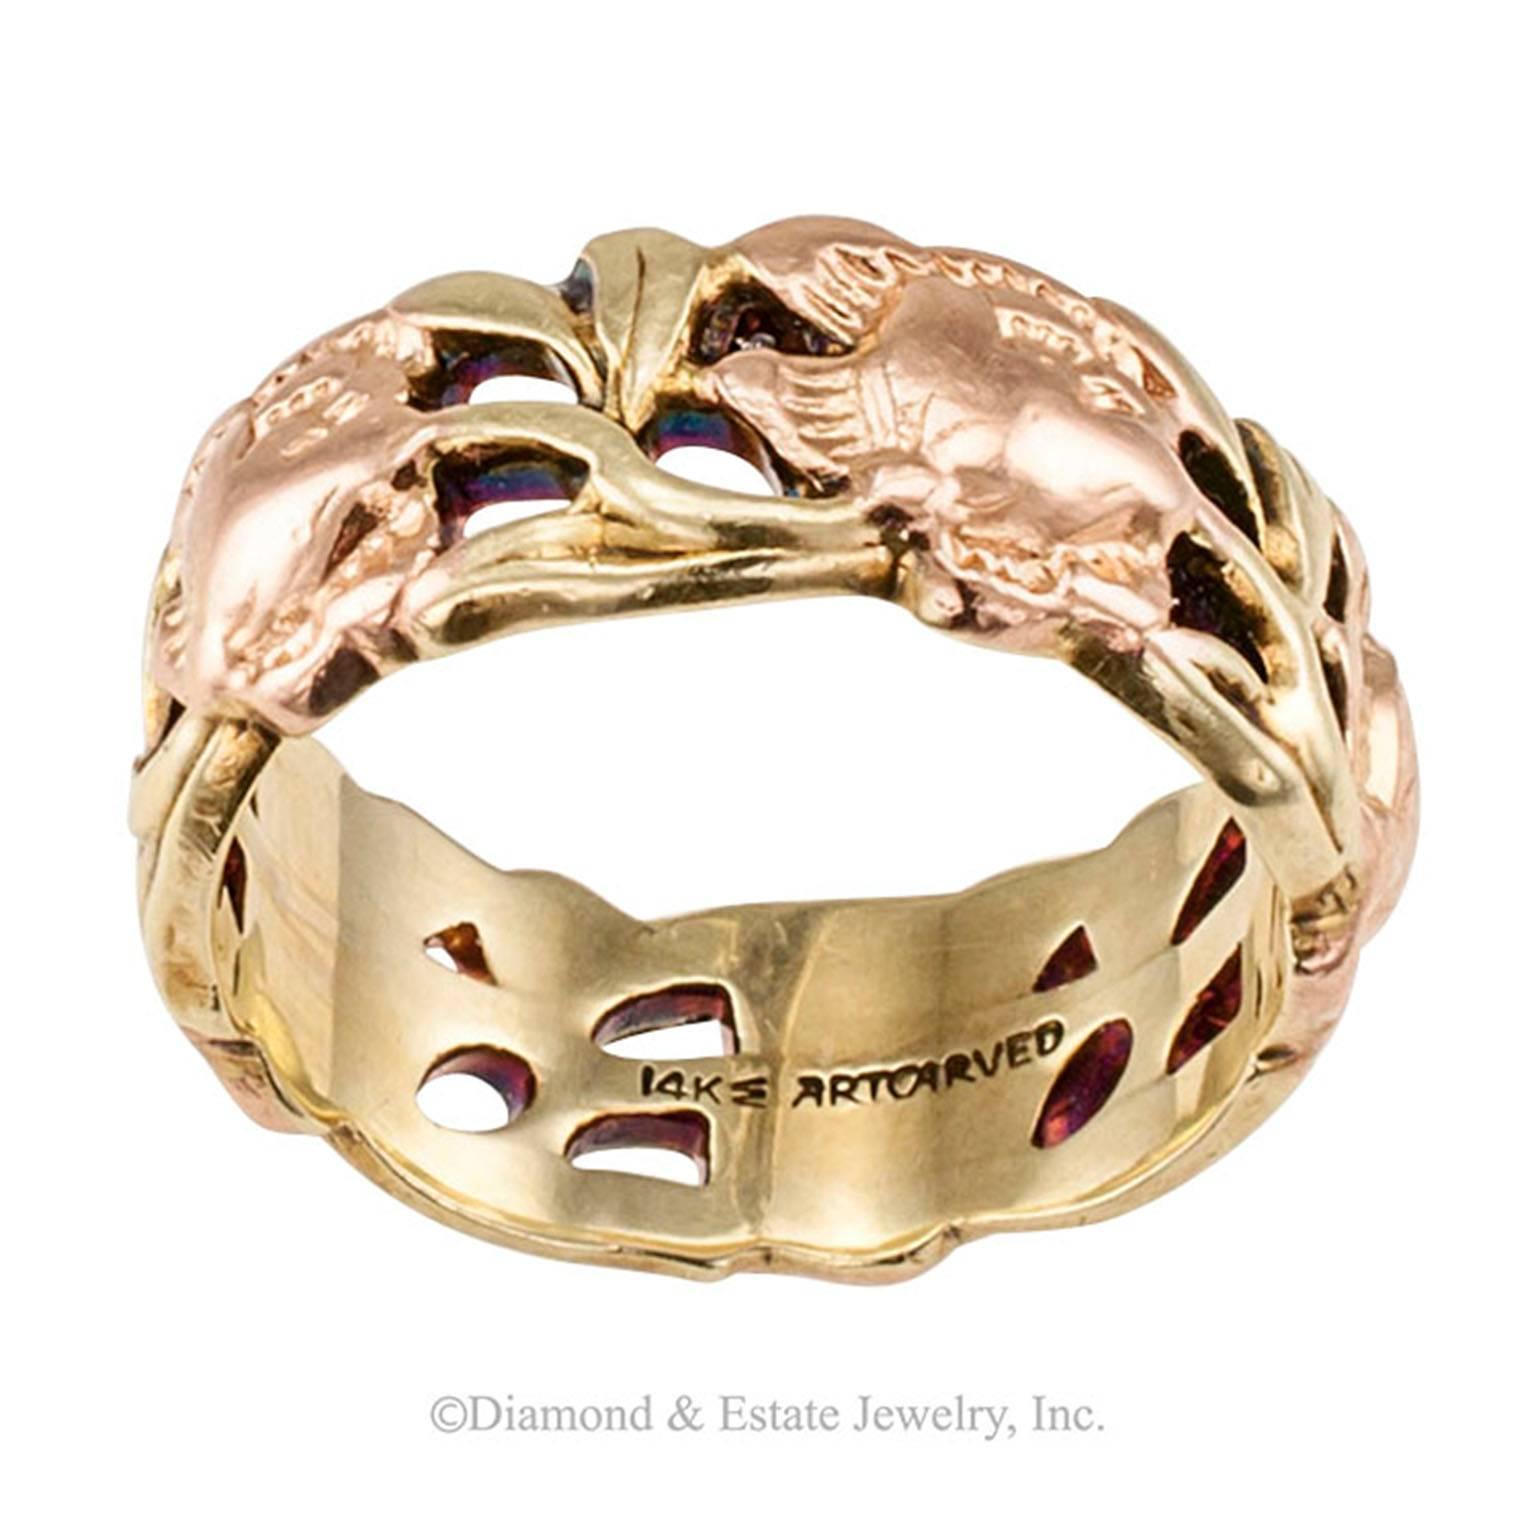 1940s Rose Green Gold Eternity Wedding Band

1940s rose and green gold foliar motif wedding band.  The open work retro design features a continuous arrangement of rose gold roses interlaced with green gold foliage.  All of it dressed in a